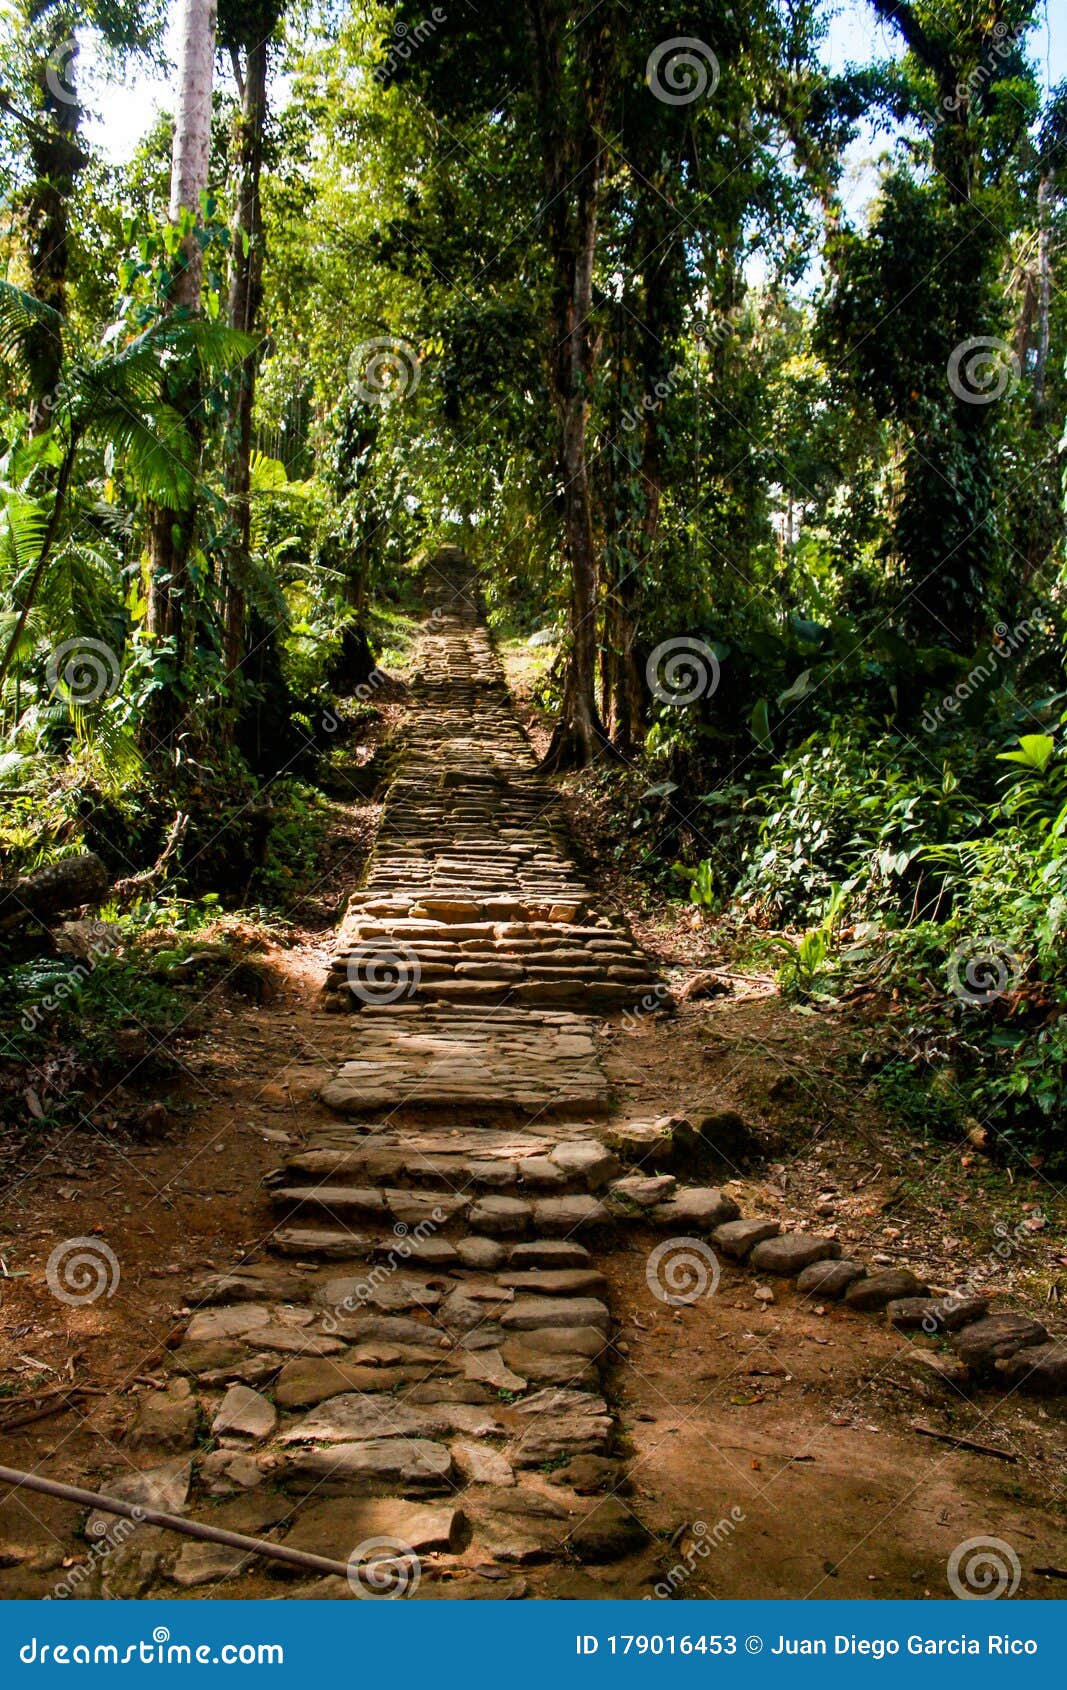 long stairway to reach the lost city